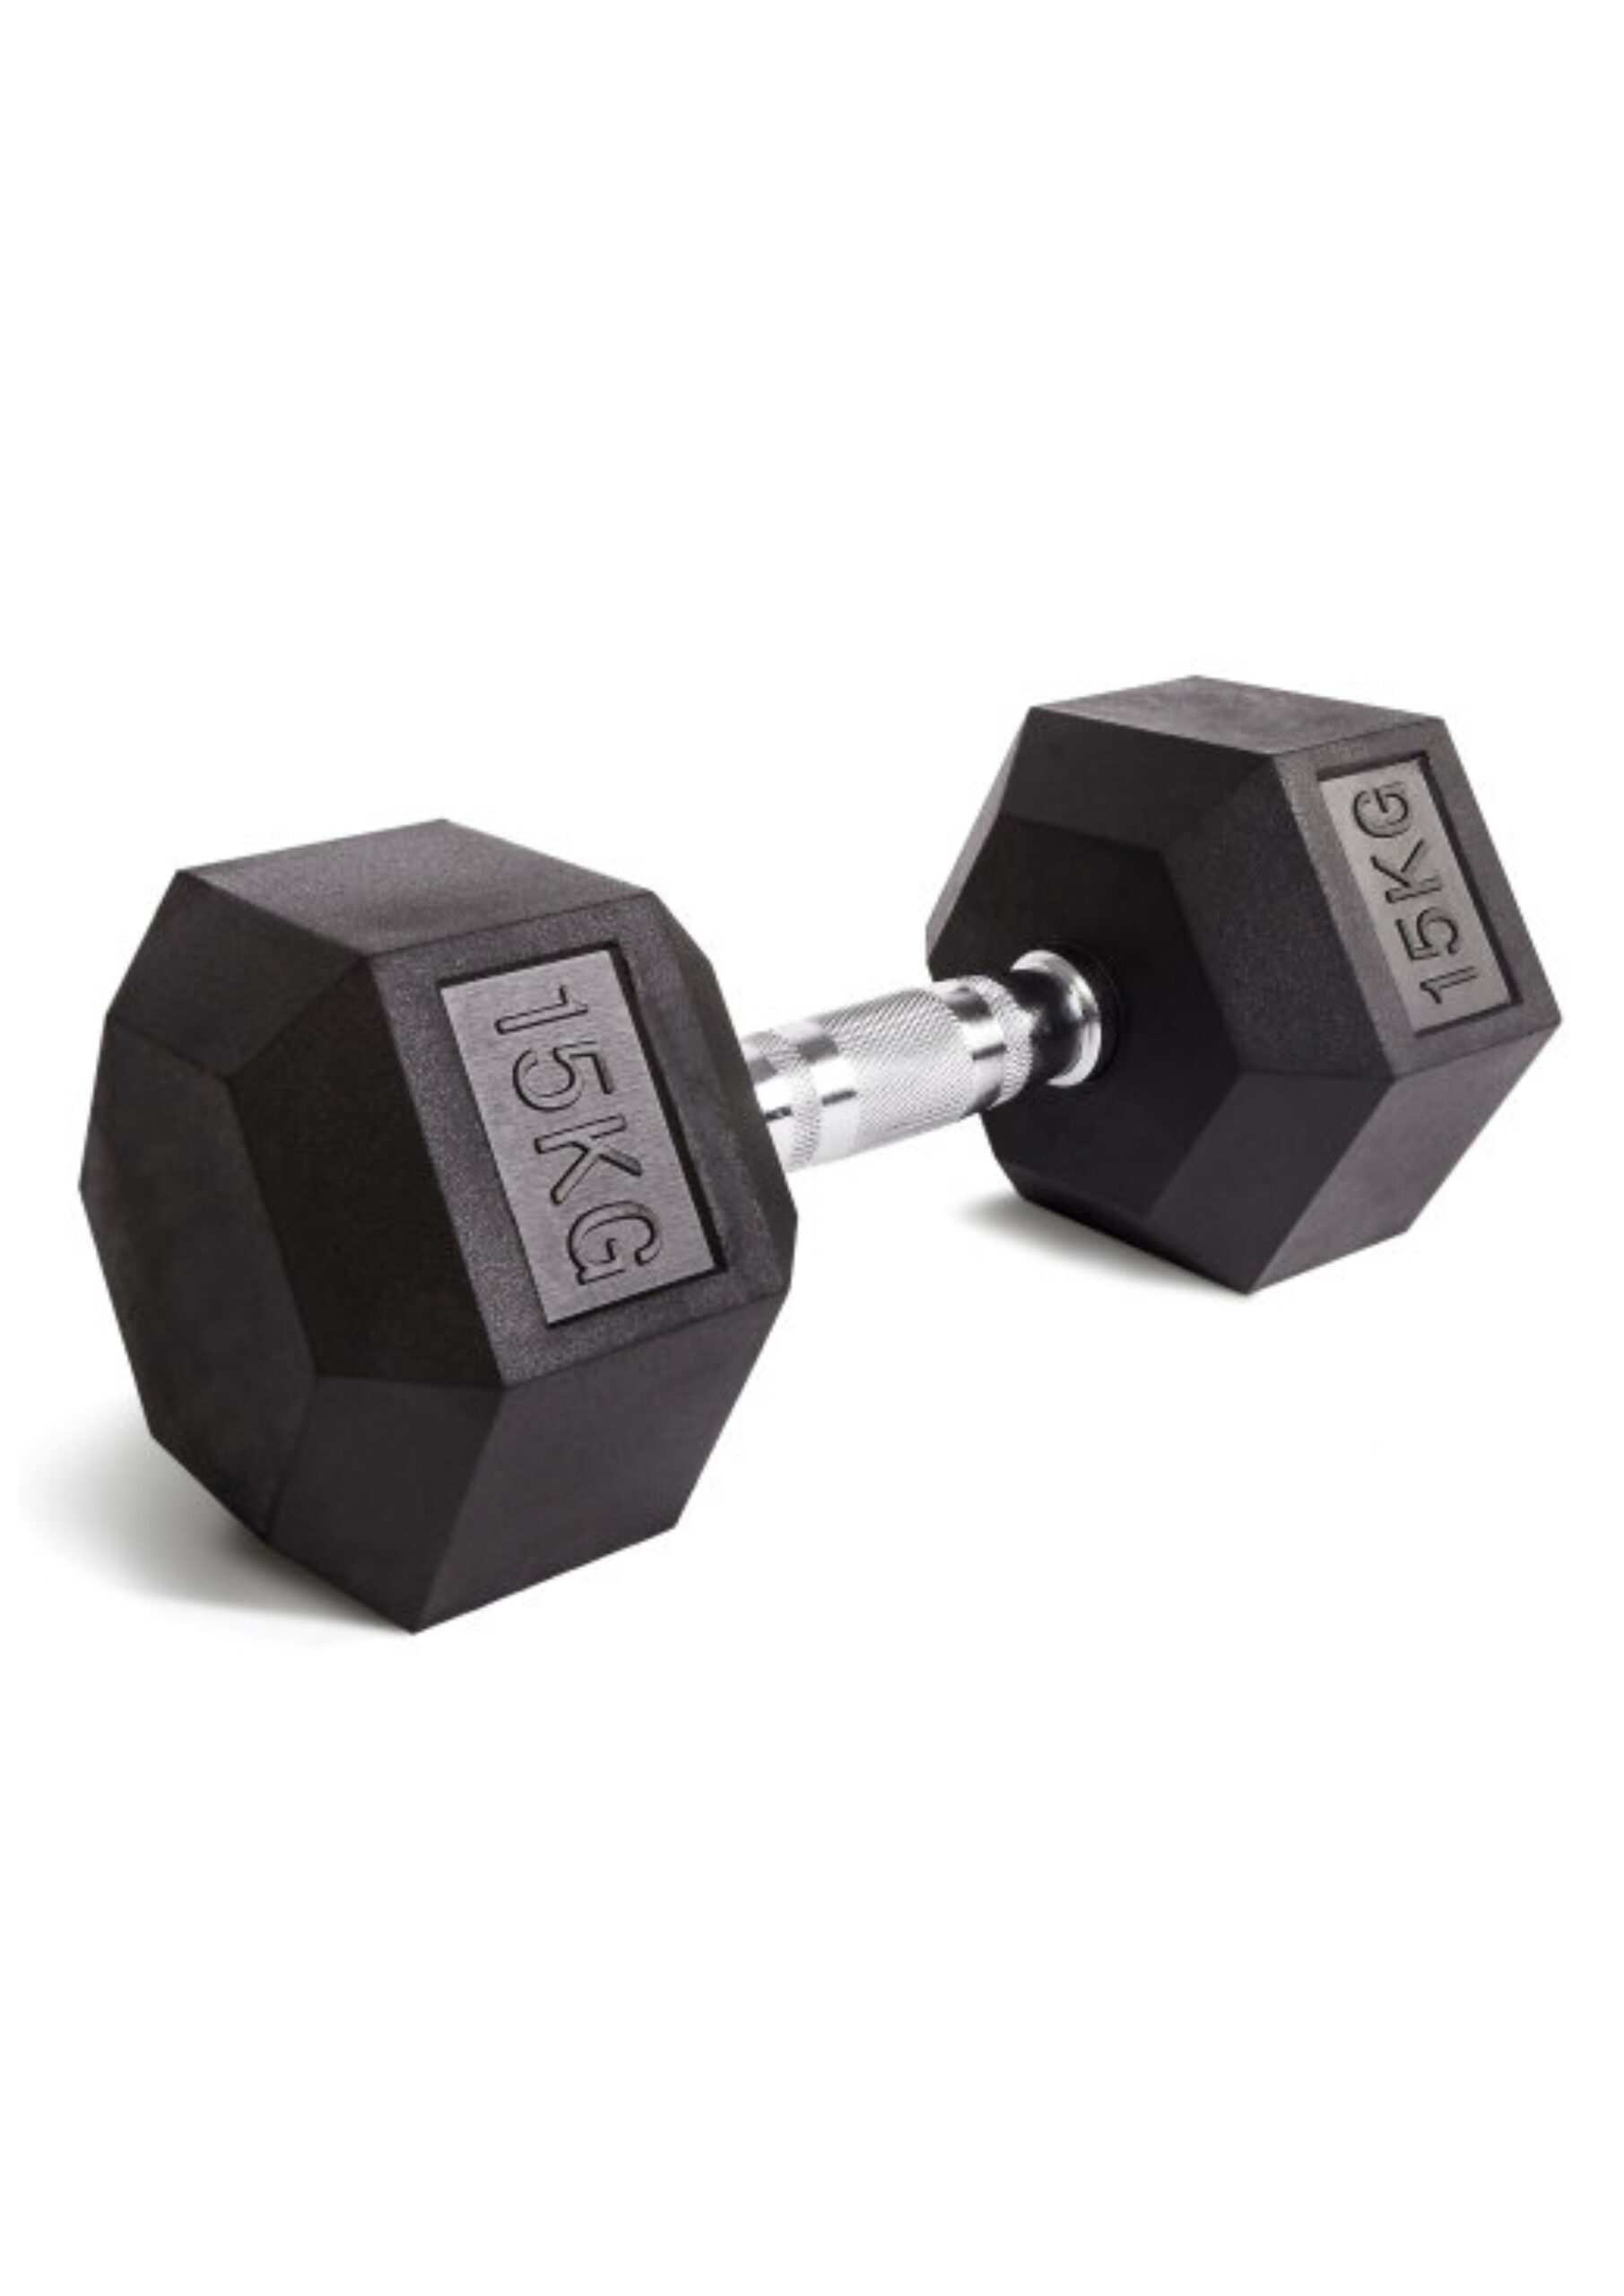 55 Recomended Will 15kg dumbbells build muscle Workout at Gym